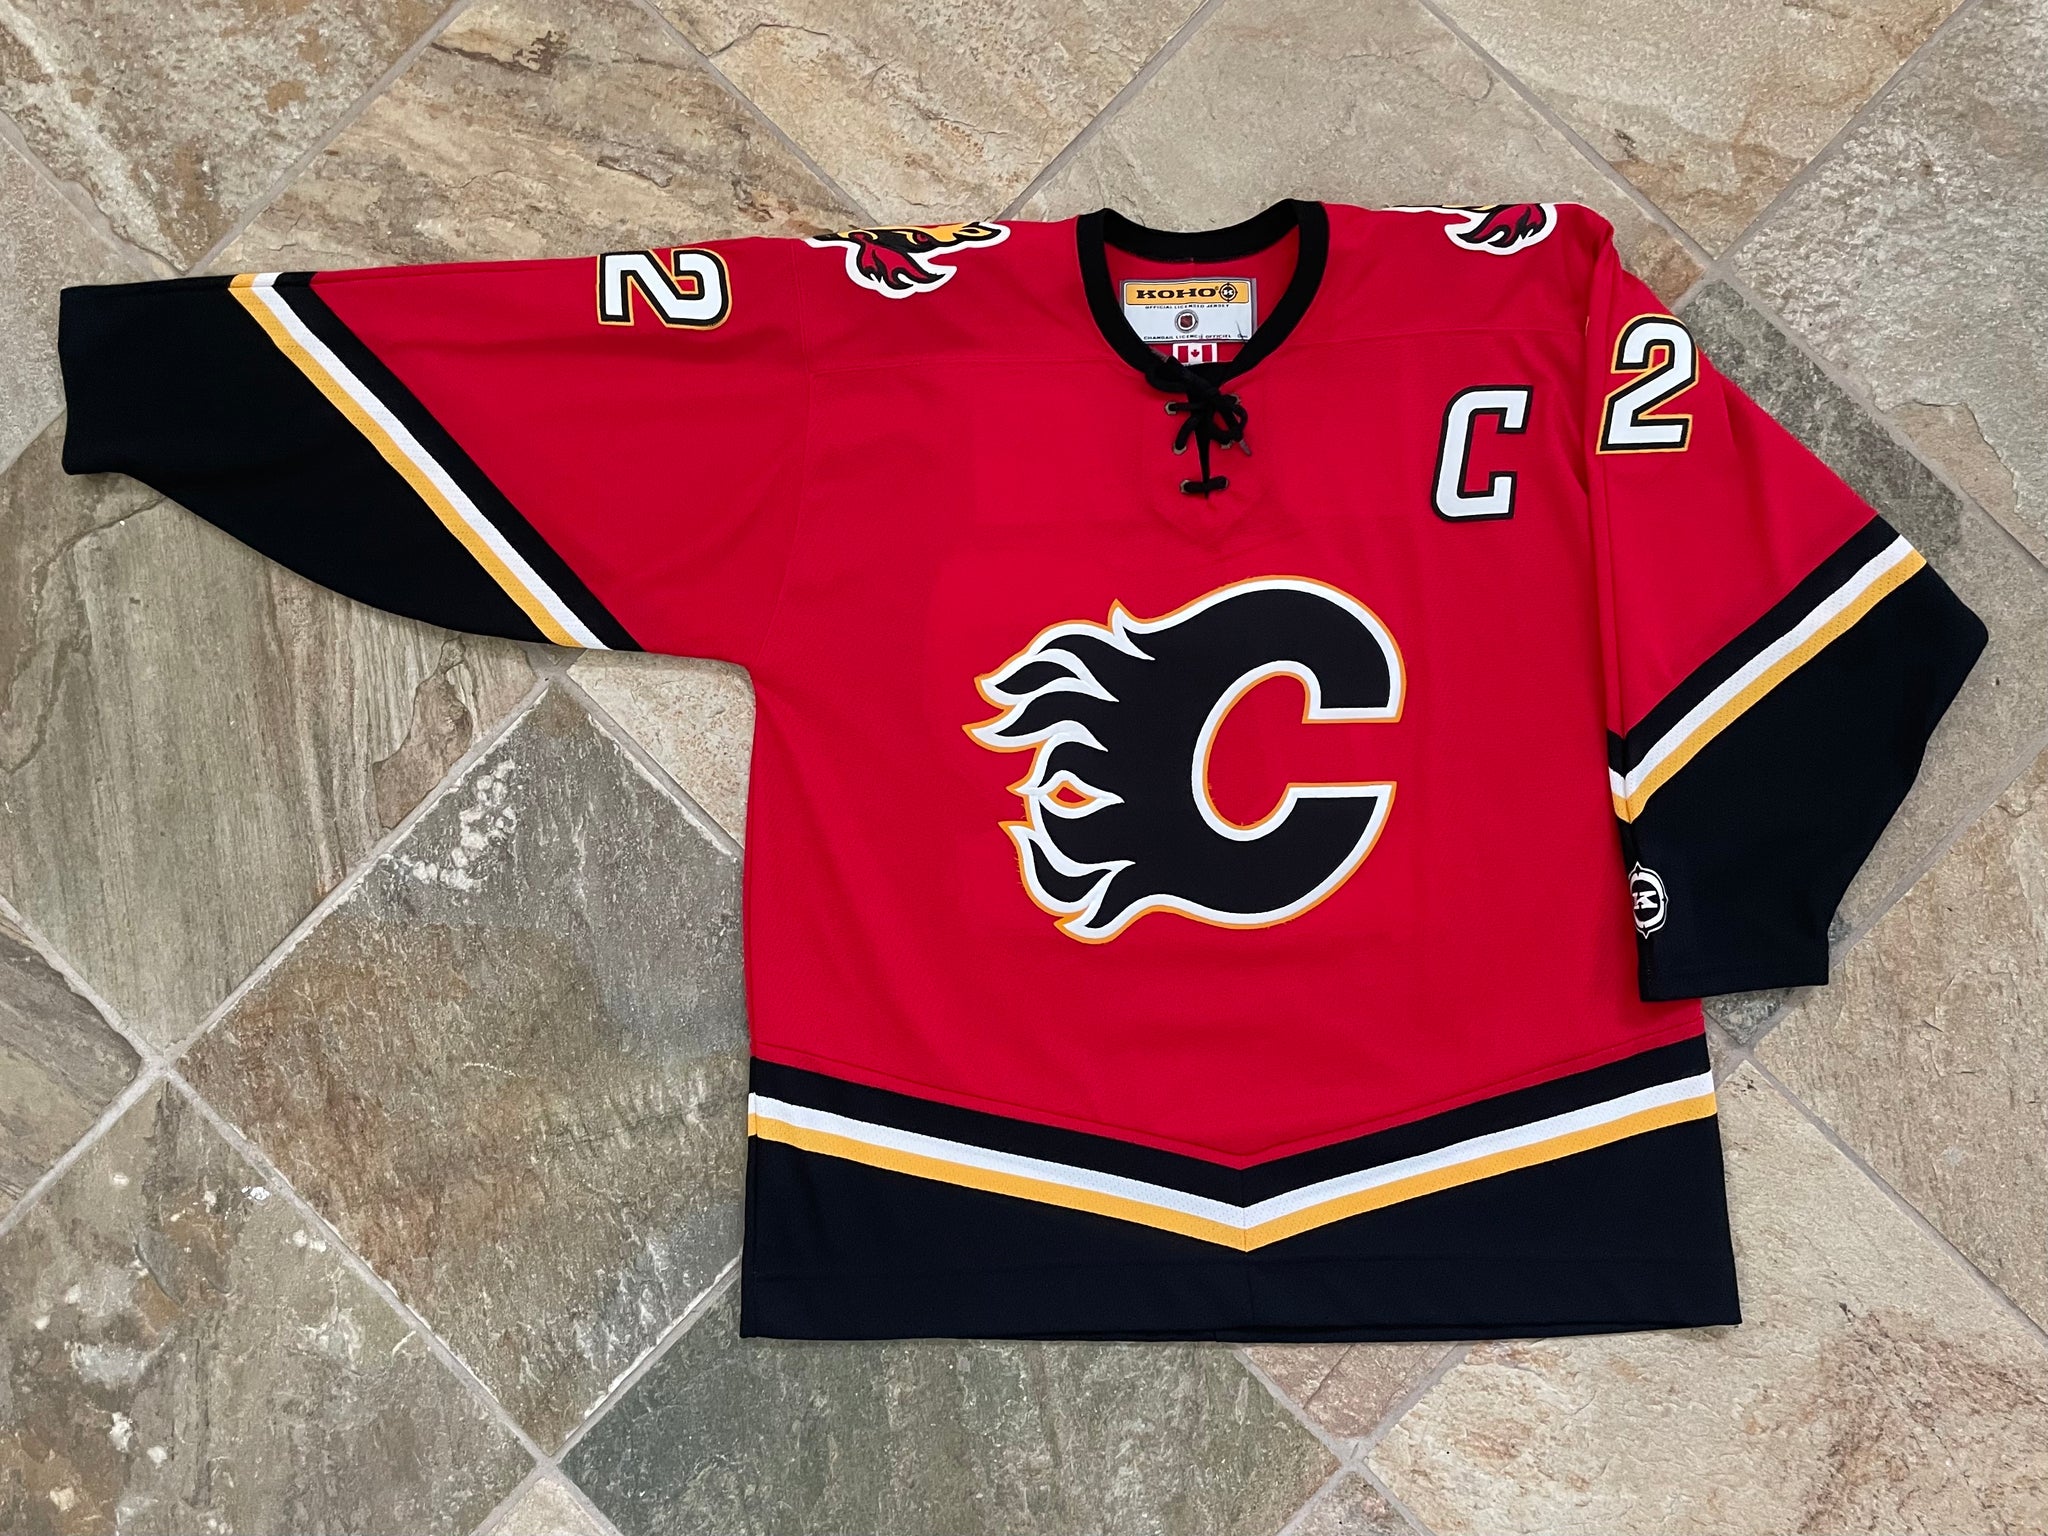 Jarome Iginla Calgary Flames Reebok Authentic Home Jersey (Red)